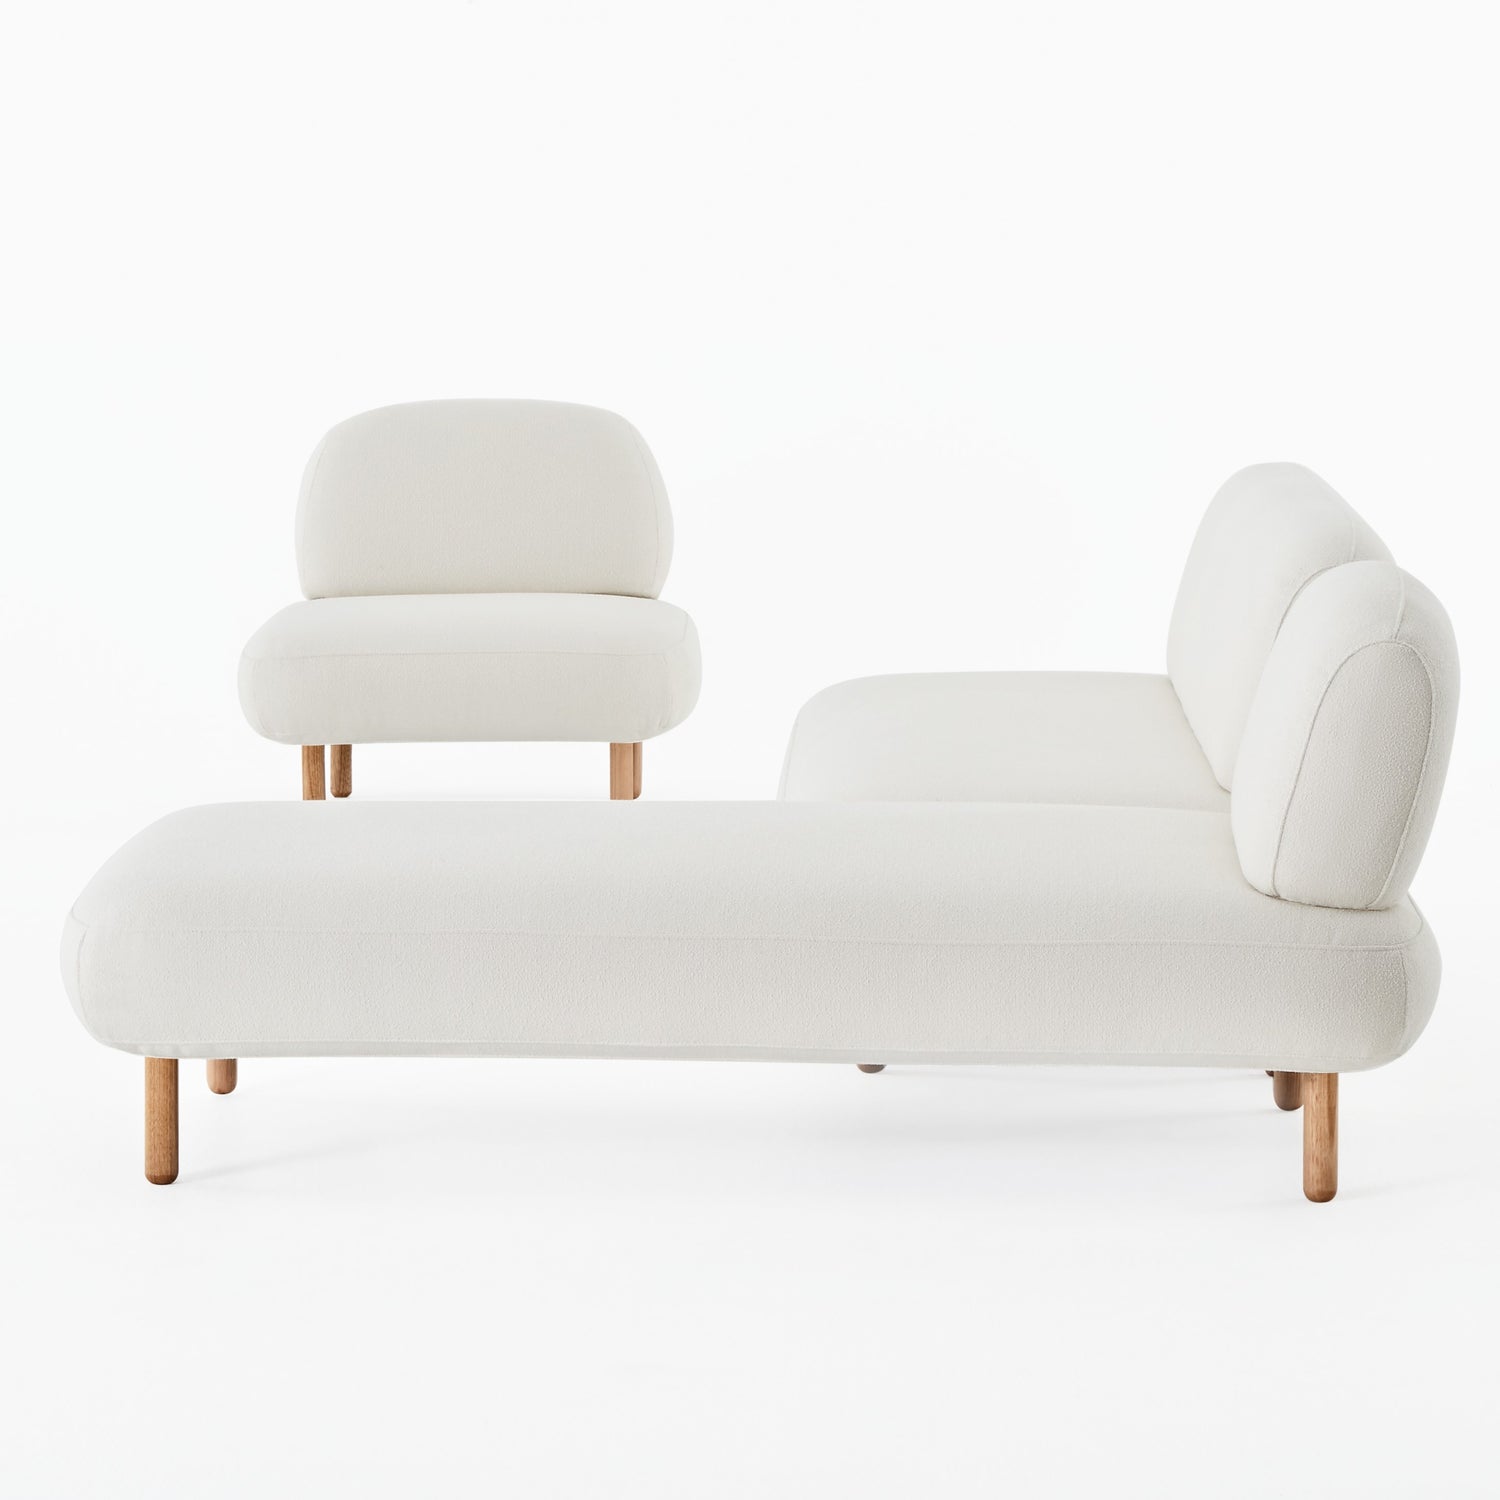 Ethos white 3 piece sofa setting with chair, 2 seater and chaise, seen from the side.